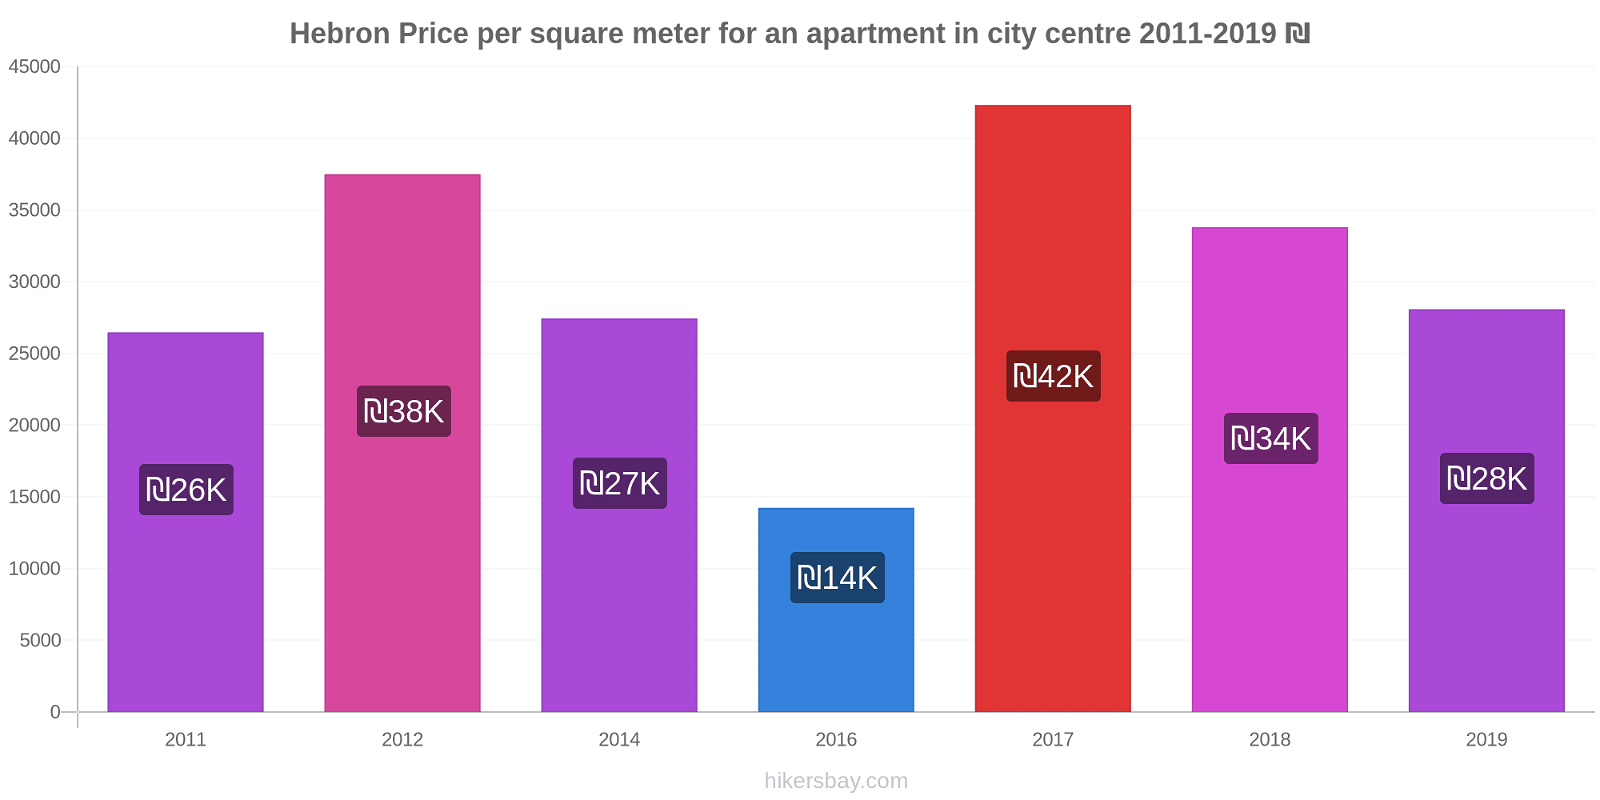 Hebron price changes Price per square meter for an apartment in city centre hikersbay.com